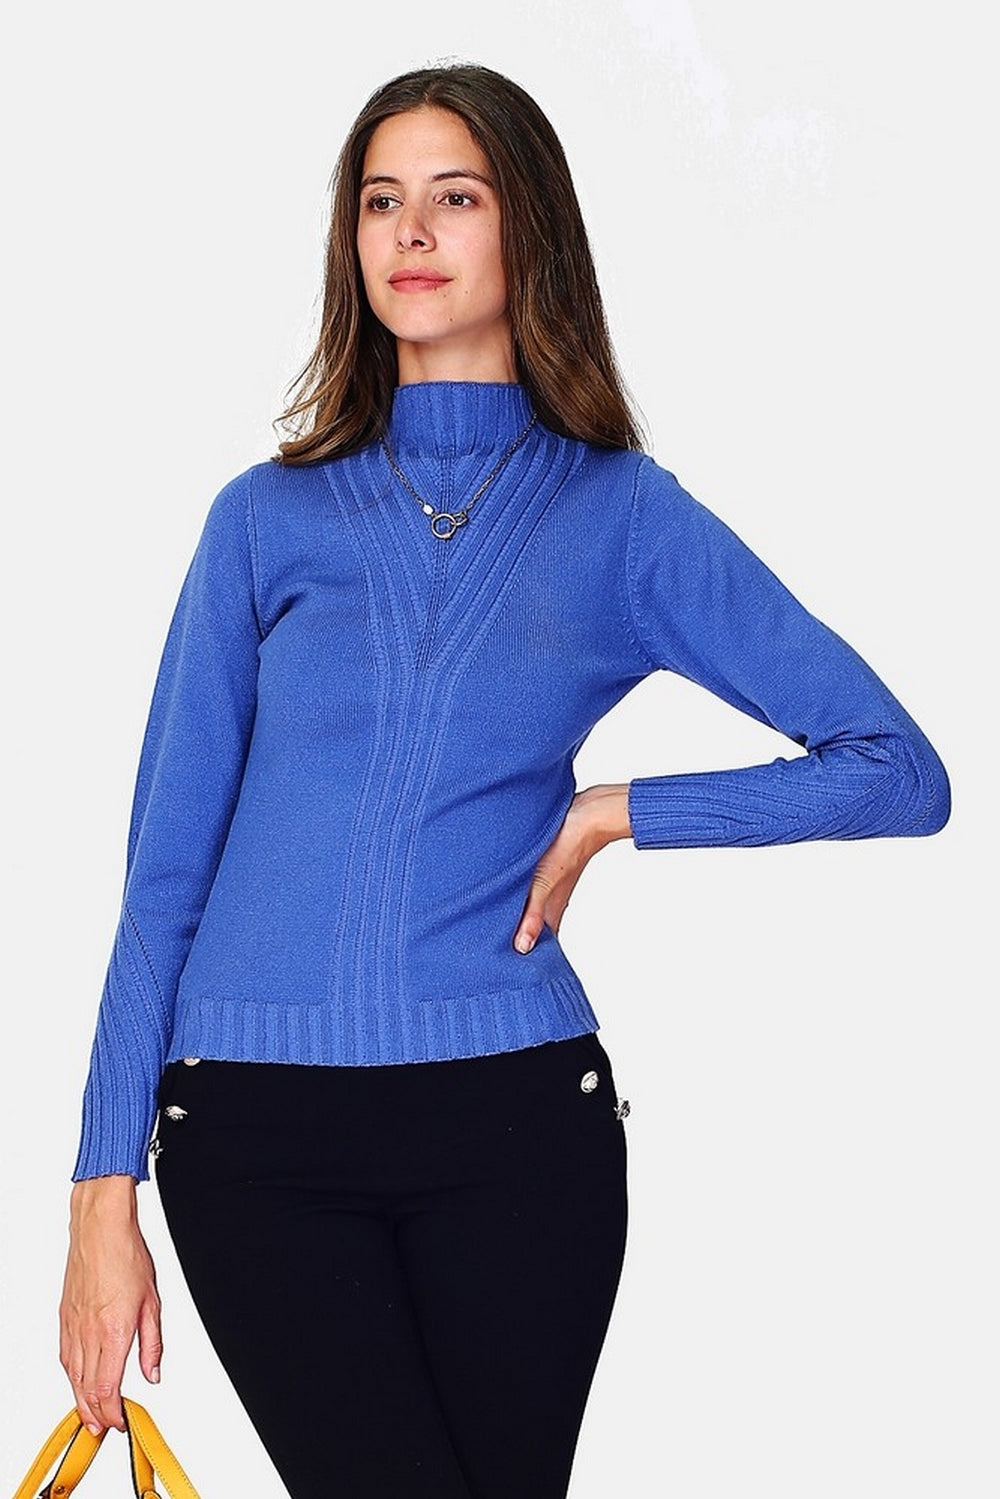 High neck jumper, fancy knit on the front with long sleeves